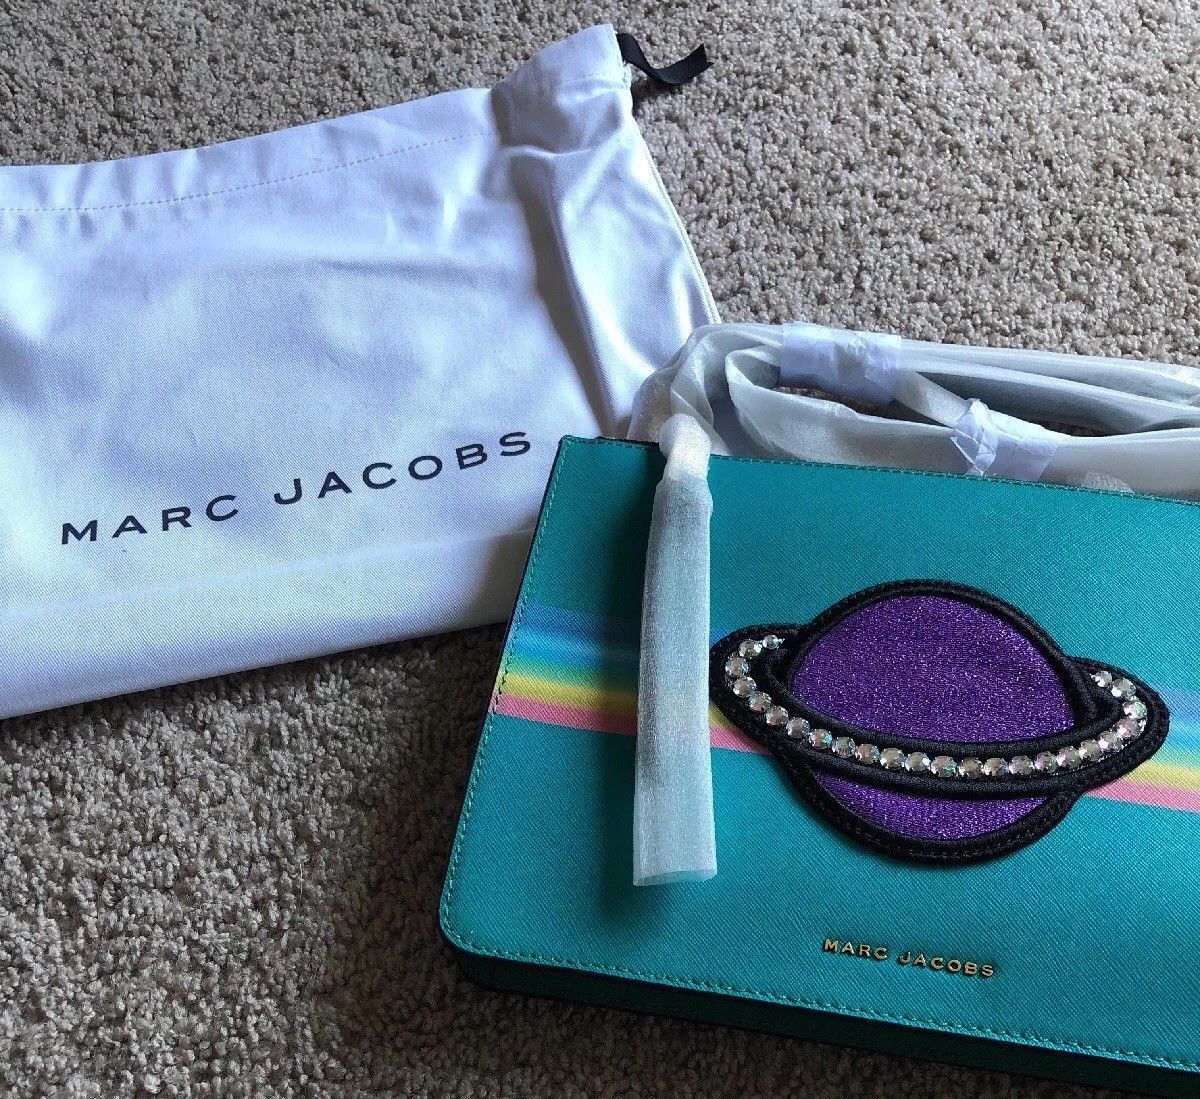 NWT Marc Jacobs Evergreen Leather Flat Crossbody Purse Bag With Dust Bag - $158.02